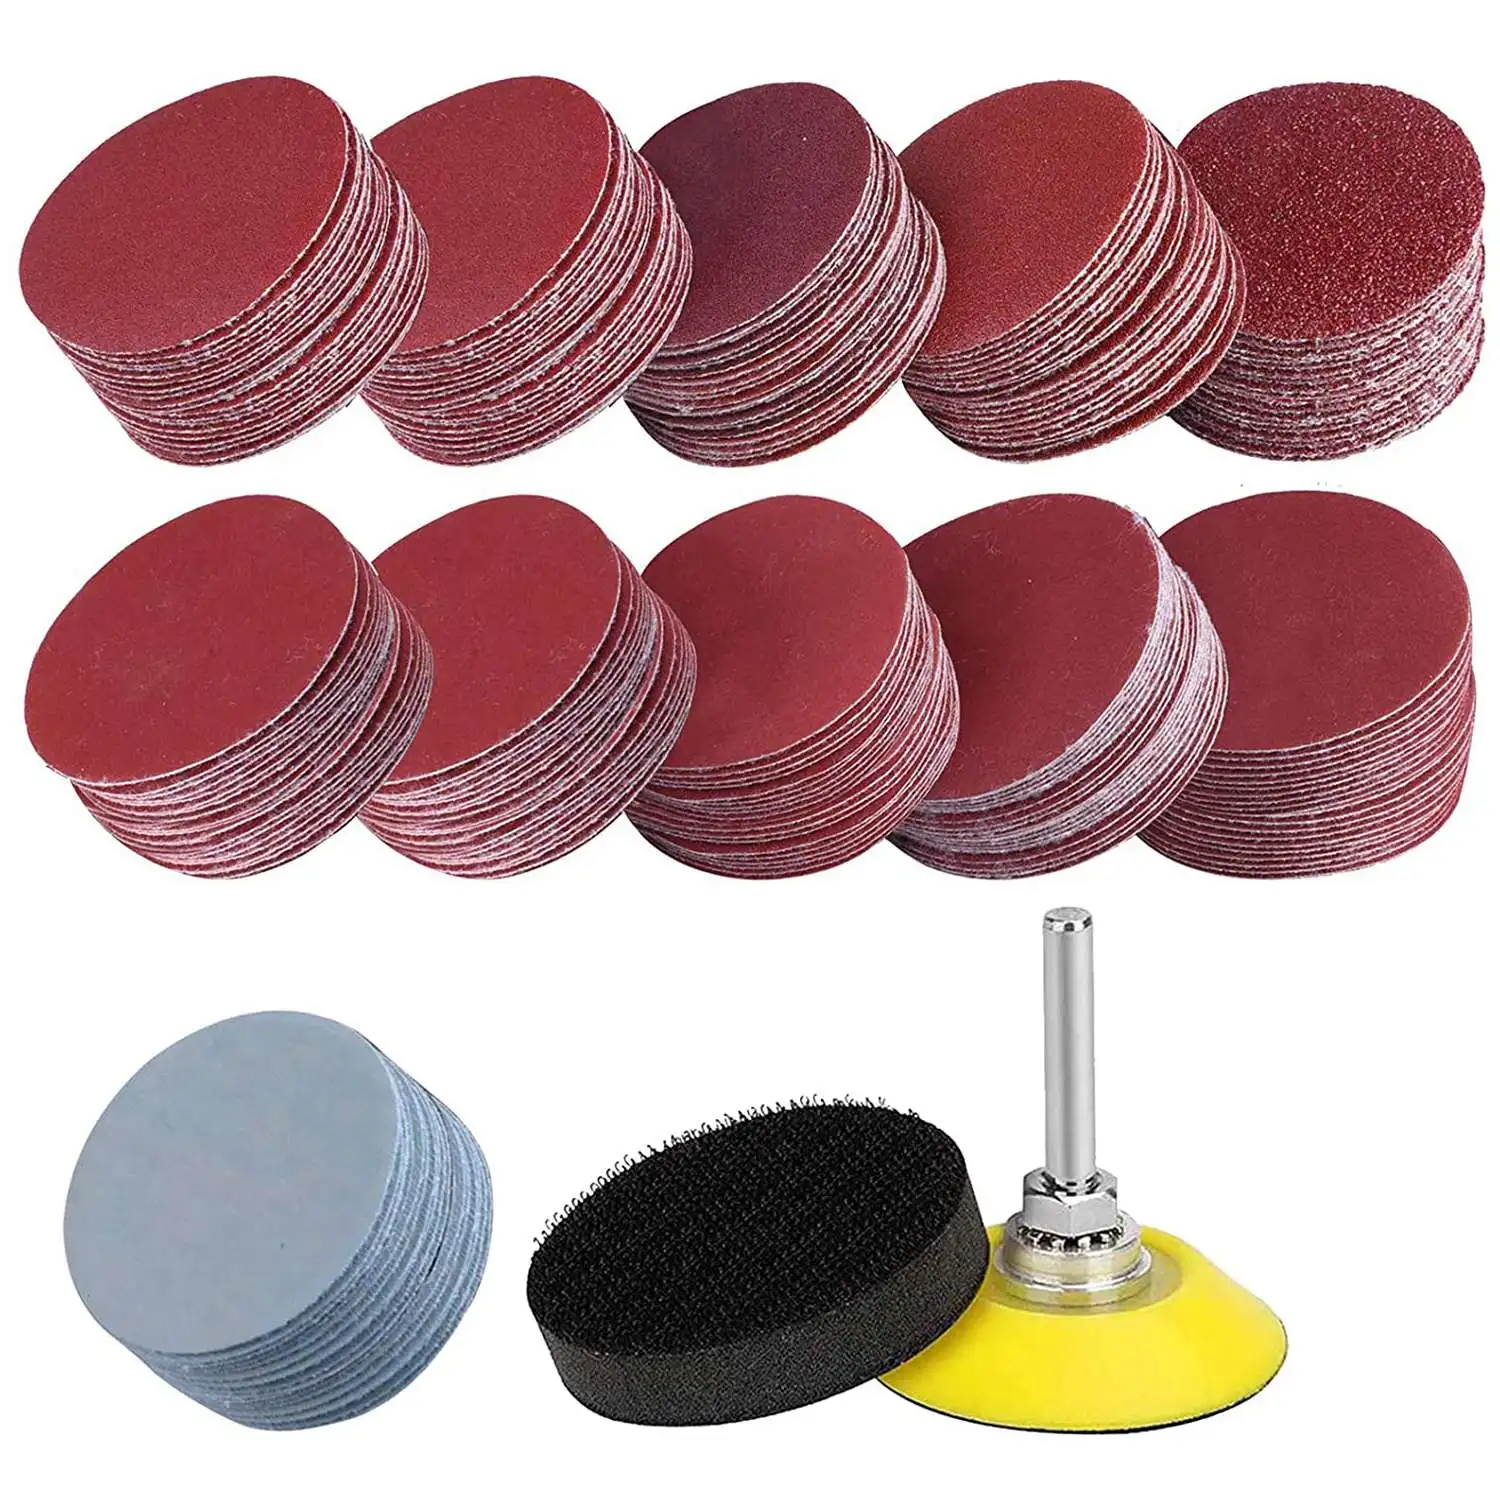 

200PCS Sanding Discs Pad Kit, 50mm Hook and Loop Sandpaper with Foam Buffing Pad, Grits Sanding Discs for Rotary Tools